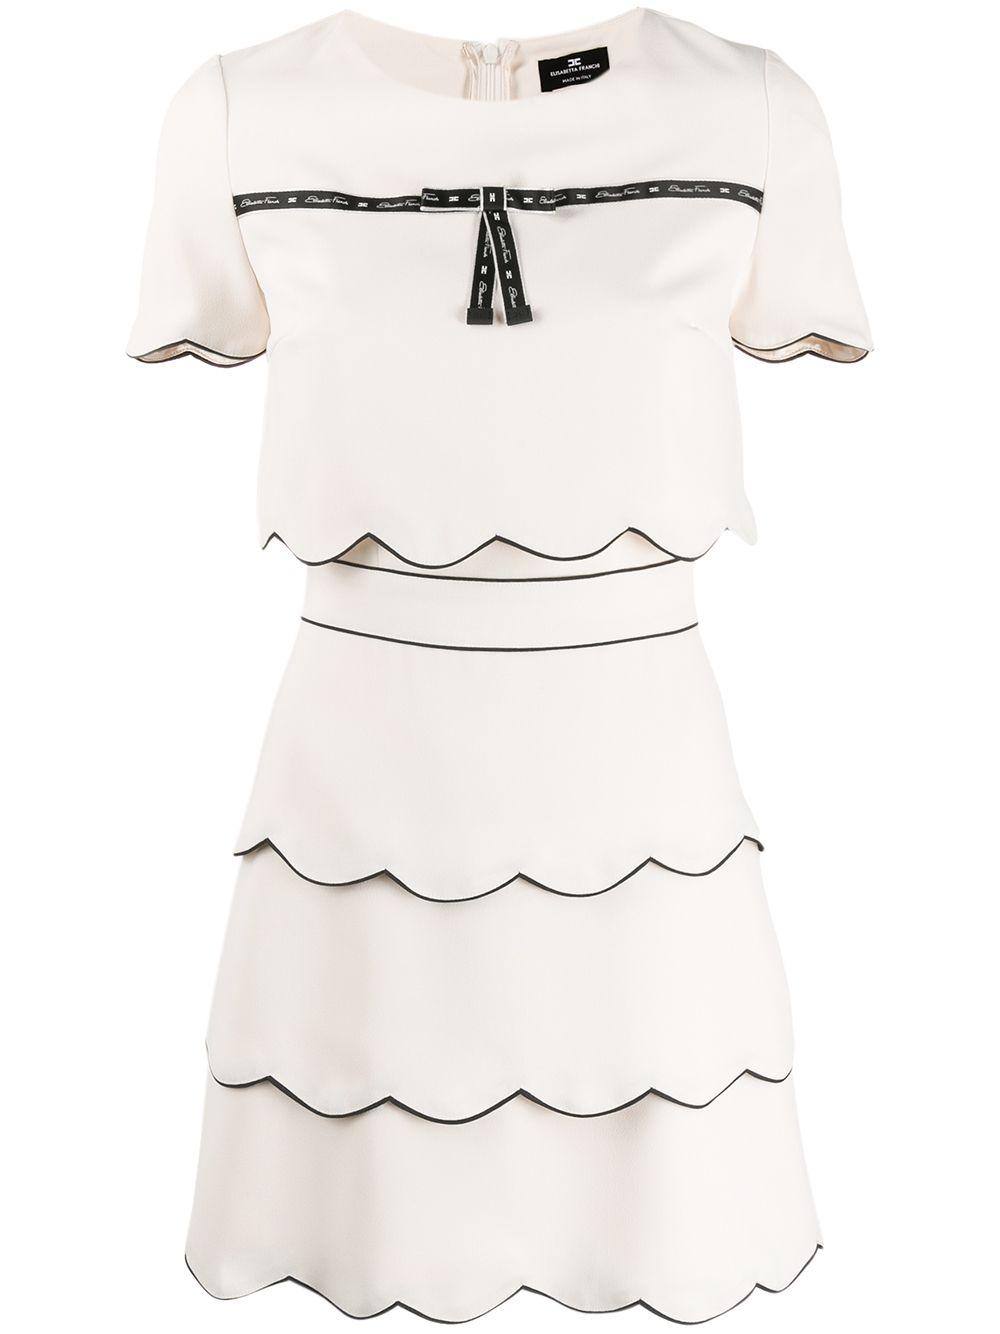 Elisabetta Franchi Synthetic Scalloped Layer Trim Dress in White 